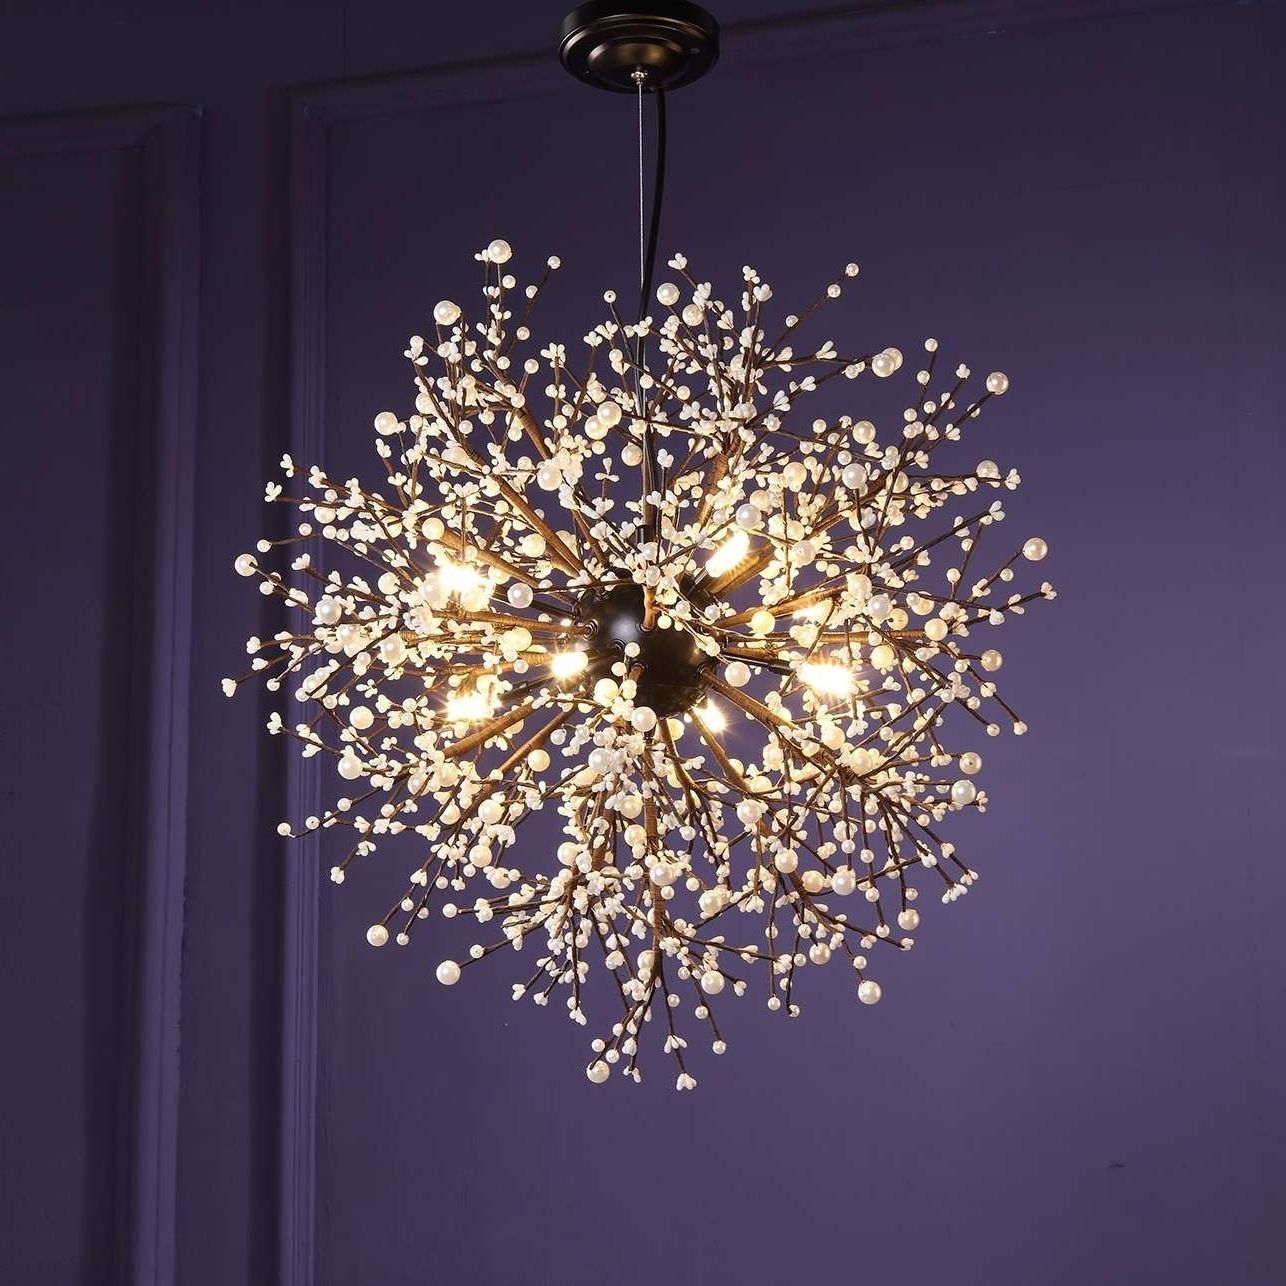 2018 Turquoise Crystal Chandelier Lights For Chandeliers Design : Marvelous Amazing Glass Ball Chandelier Light (View 9 of 15)